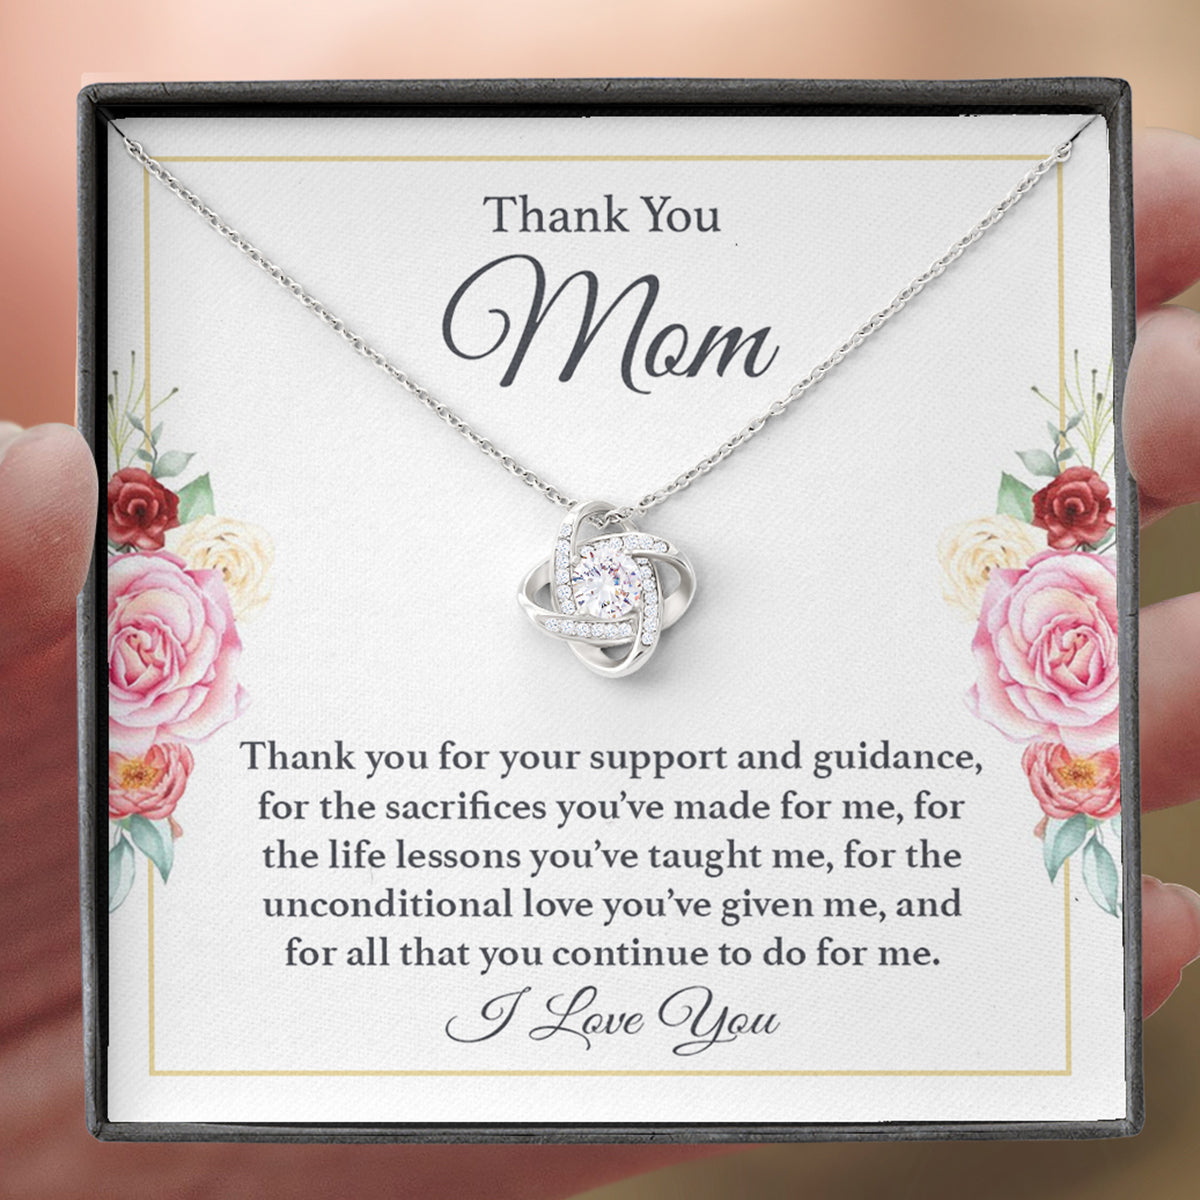 Thank You Mom Necklace - I Love You